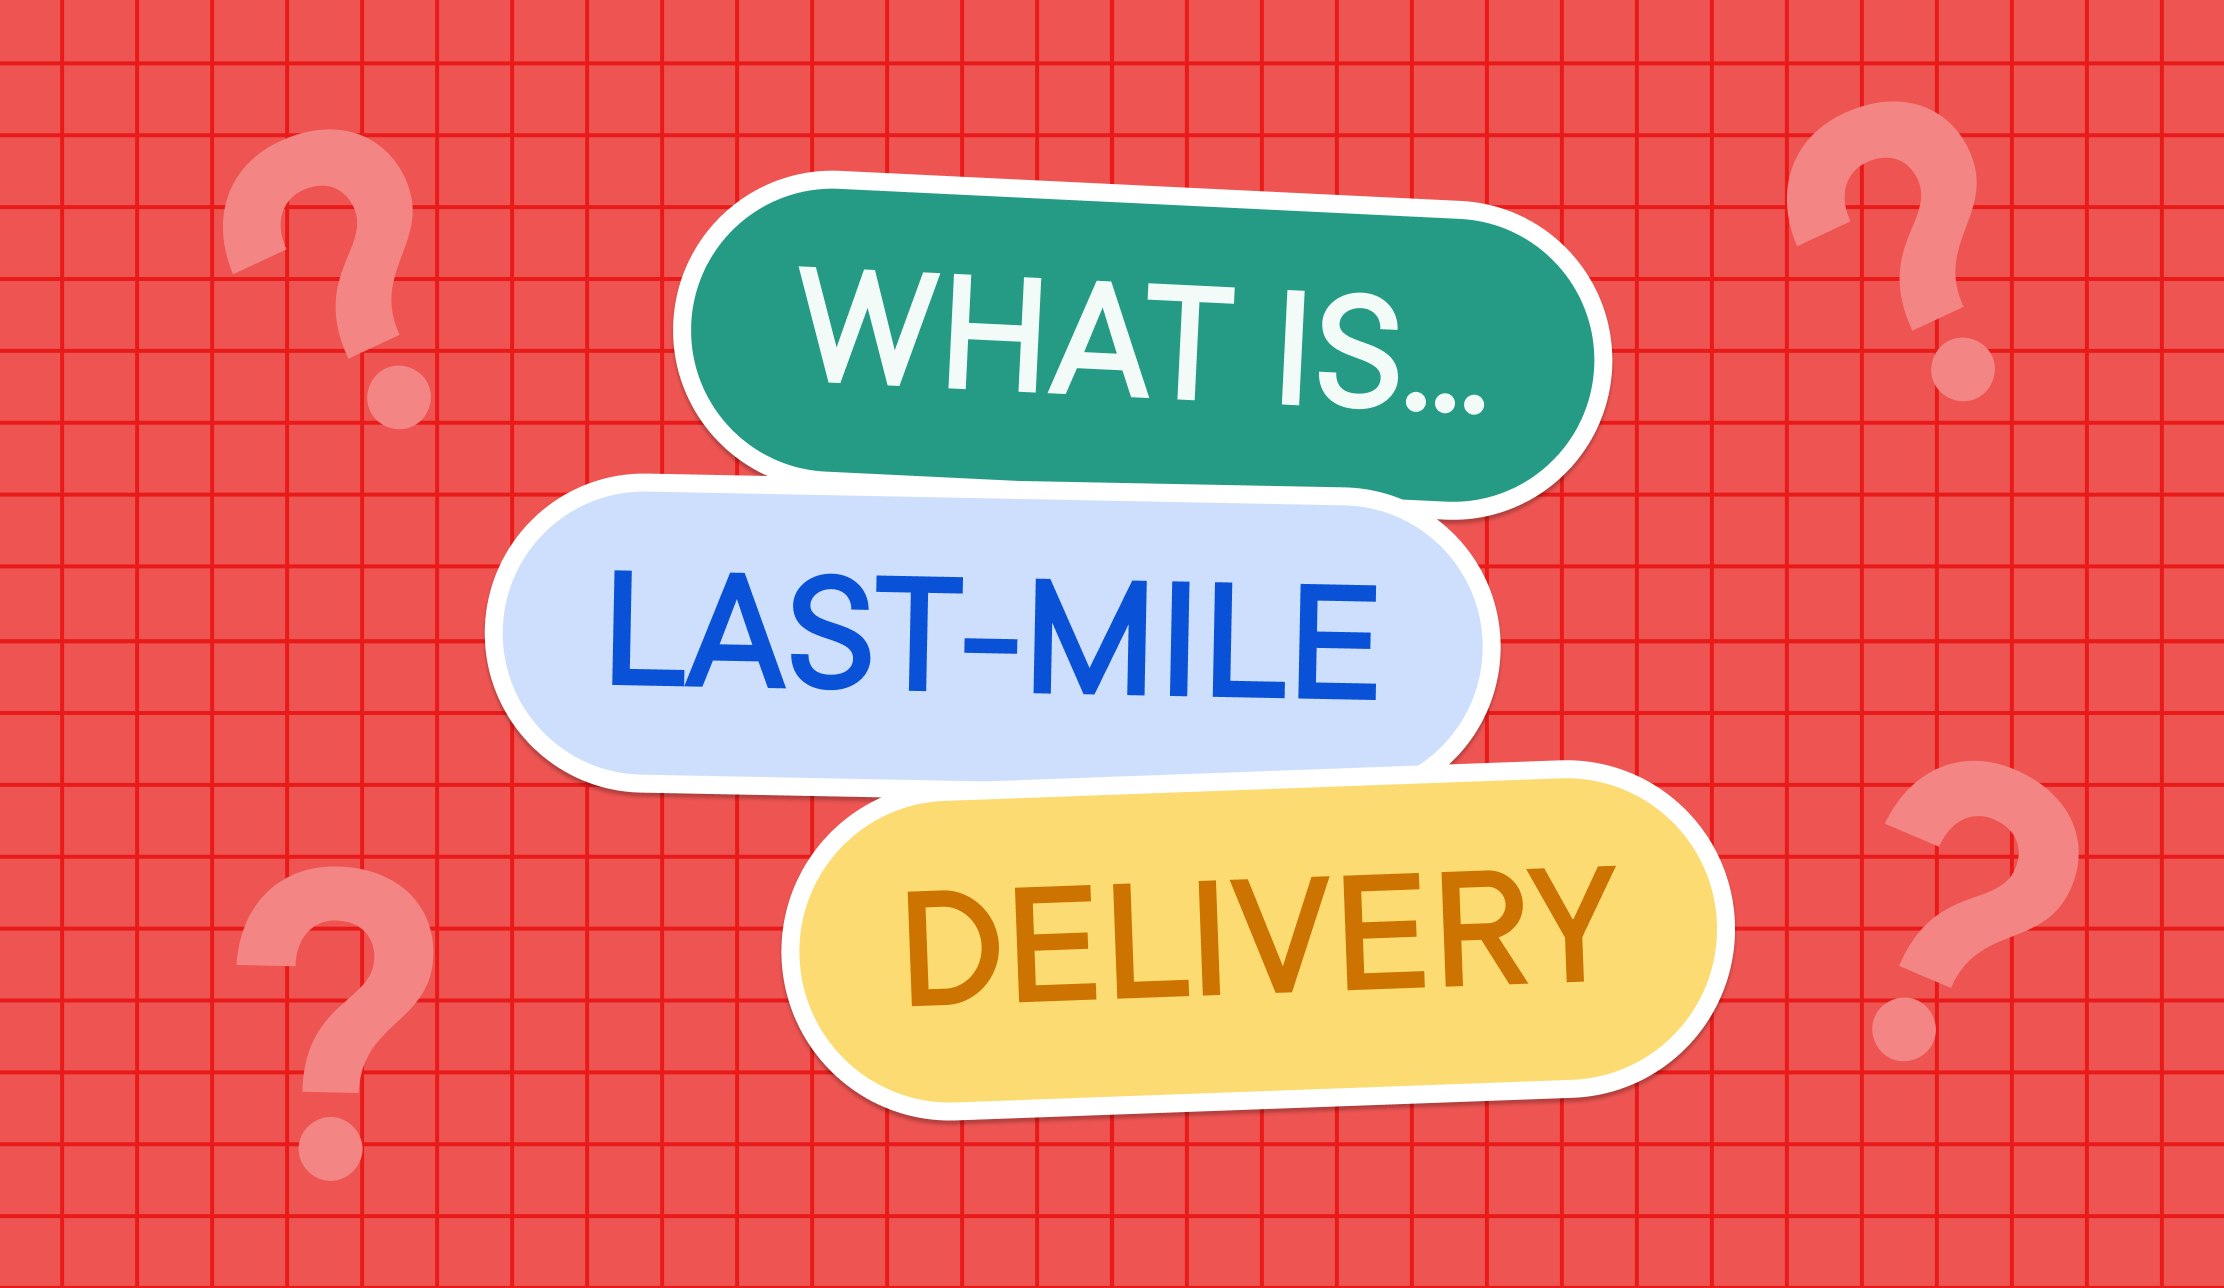 What is last mile delivery?